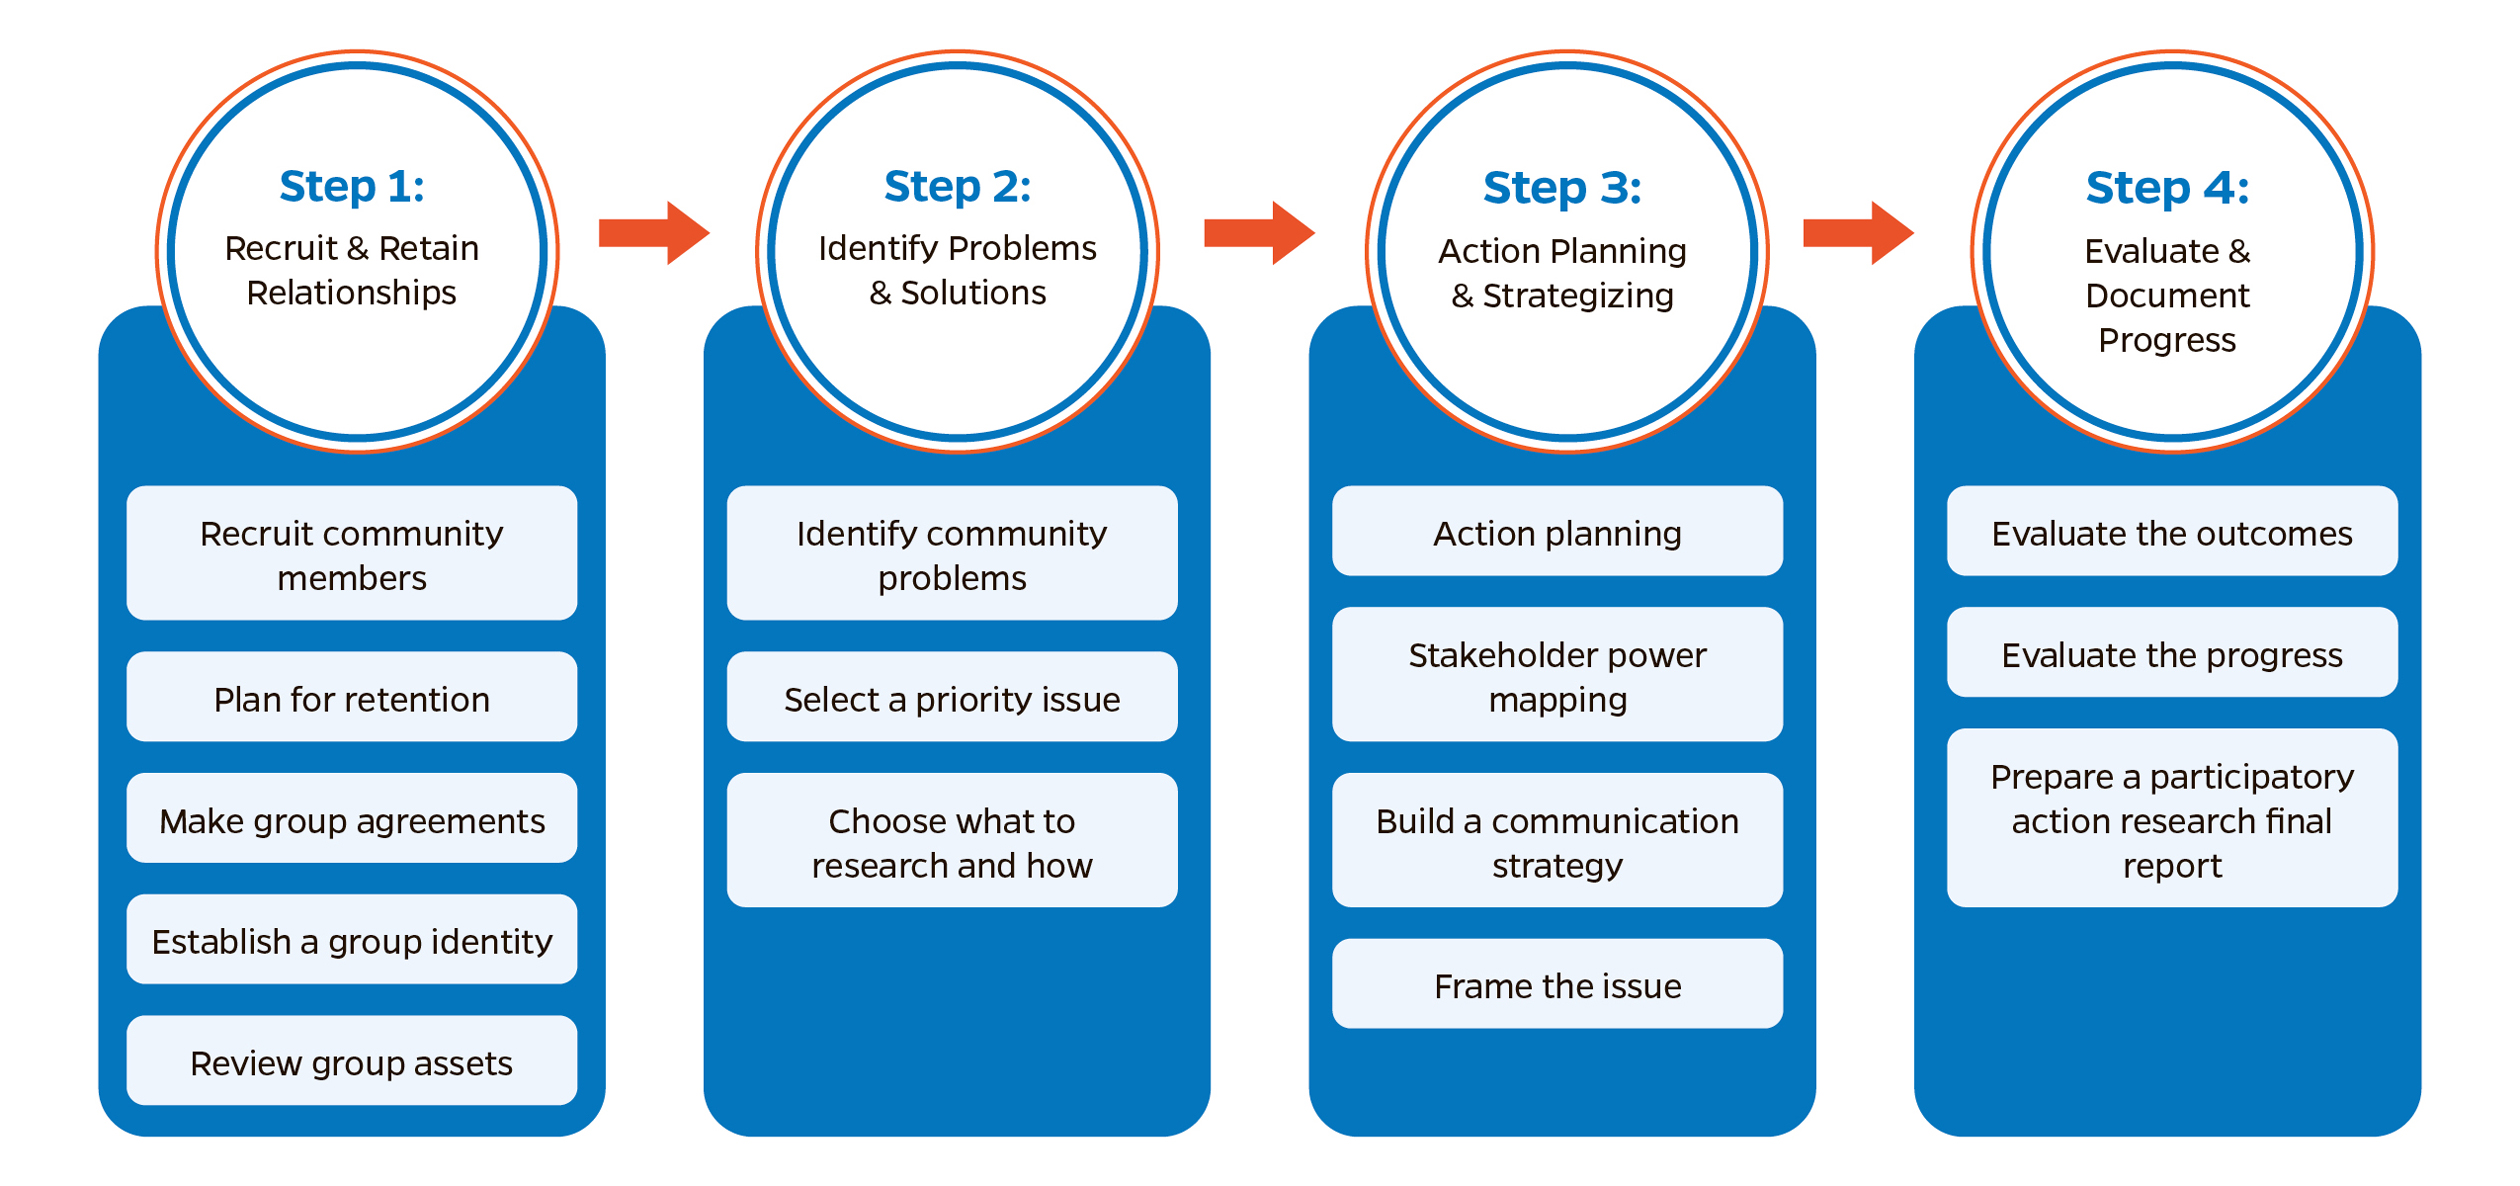 4-step community engagement process, modified from the Center for Wellness and Nutrition